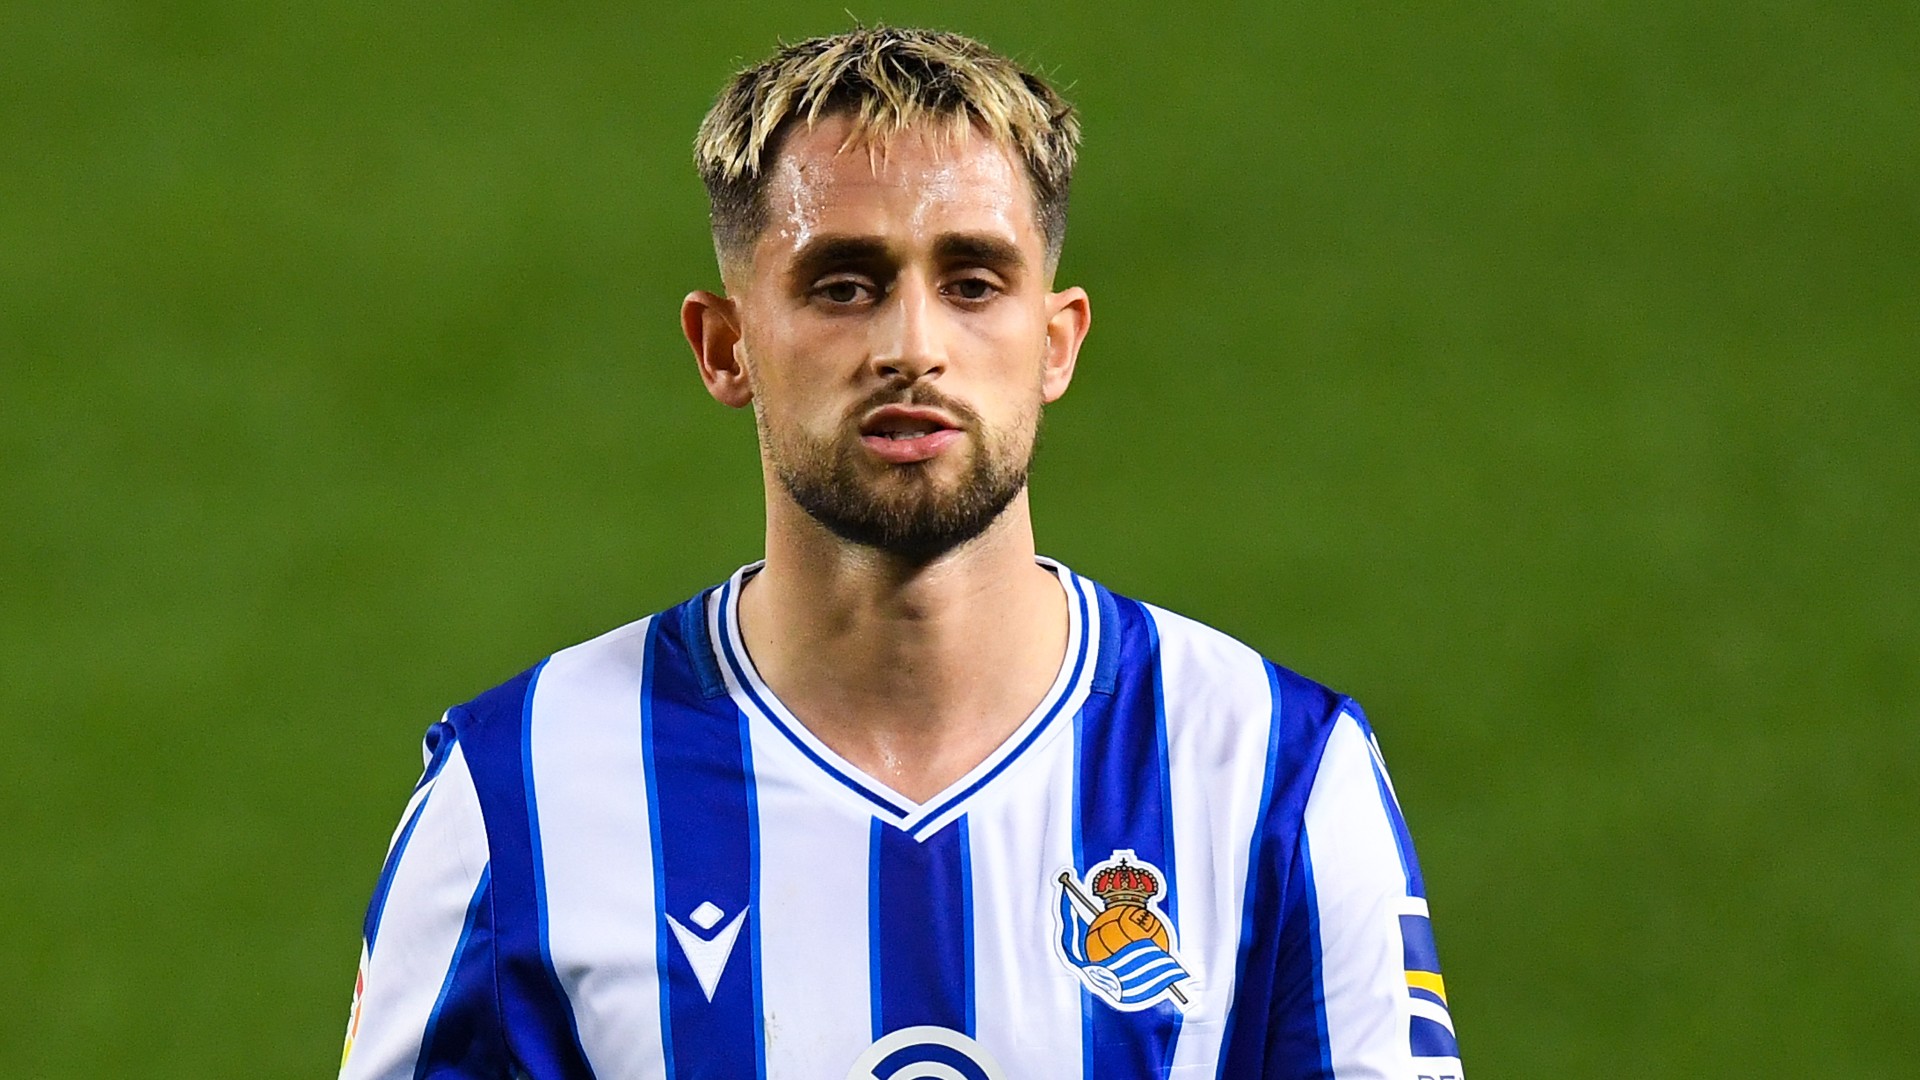 The 29-year old son of father (?) and mother(?) Adnan Januzaj in 2024 photo. Adnan Januzaj earned a  million dollar salary - leaving the net worth at 1 million in 2024